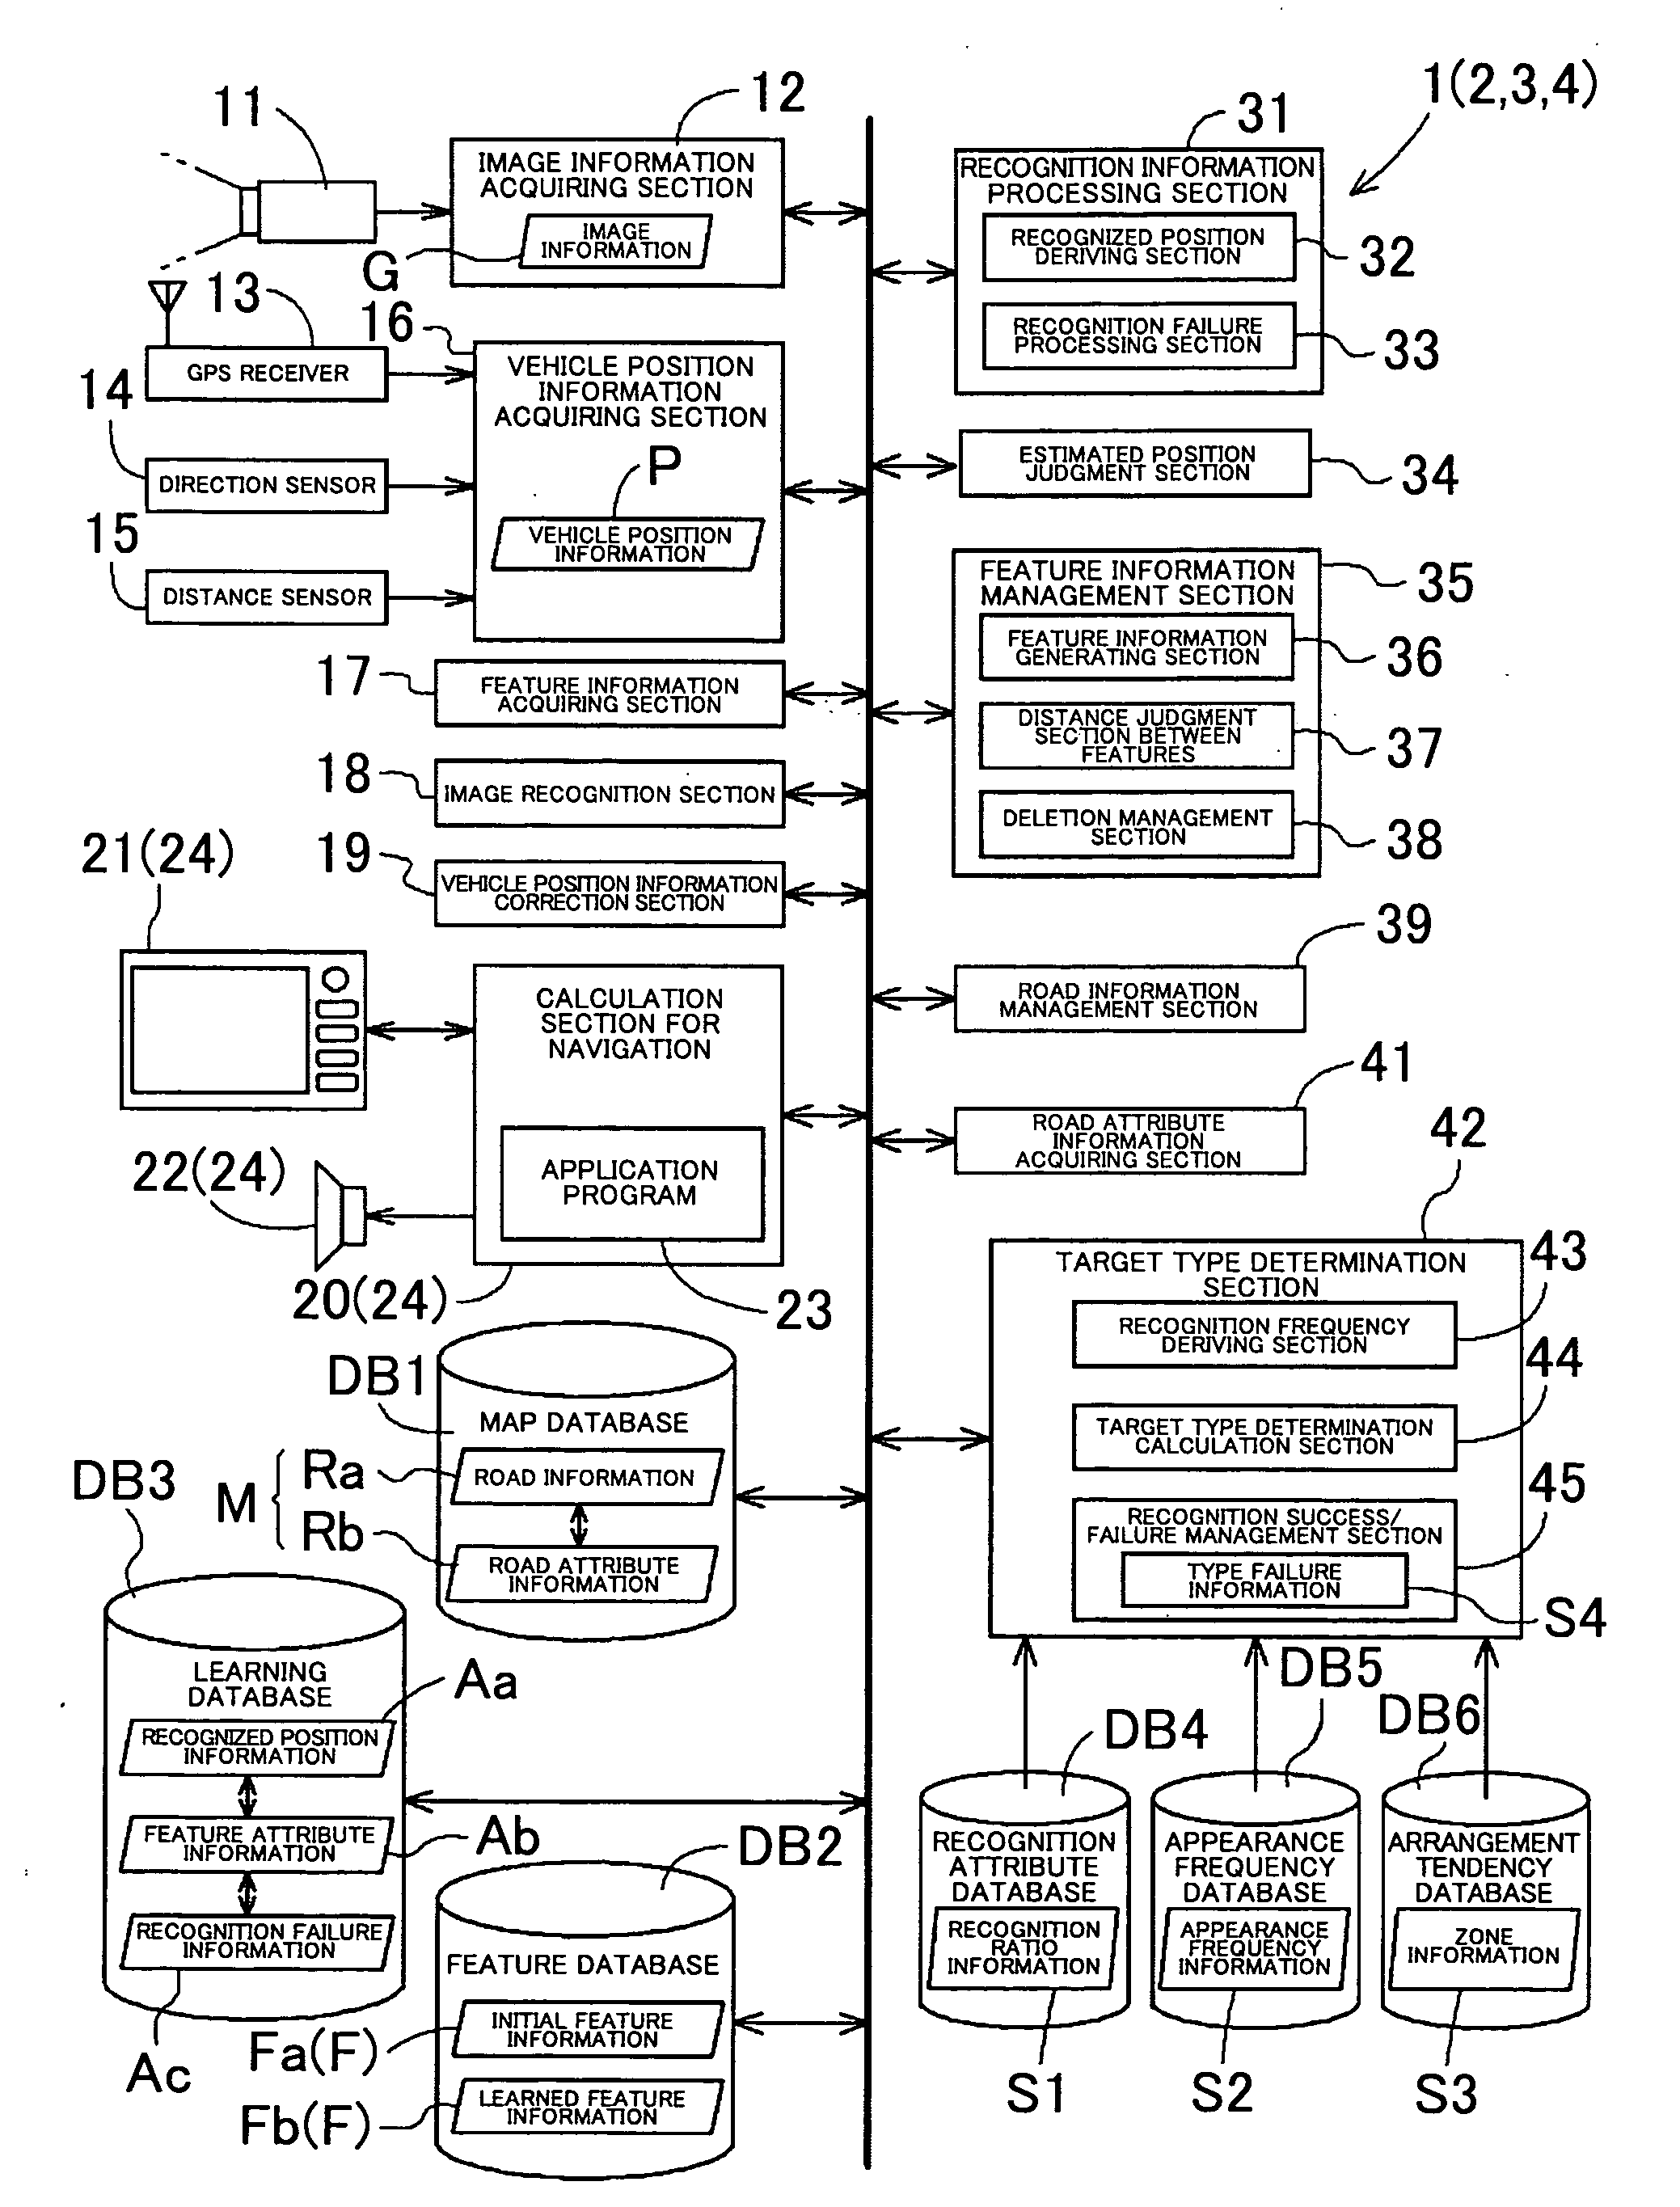 Feature information management apparatuses, methods, and programs